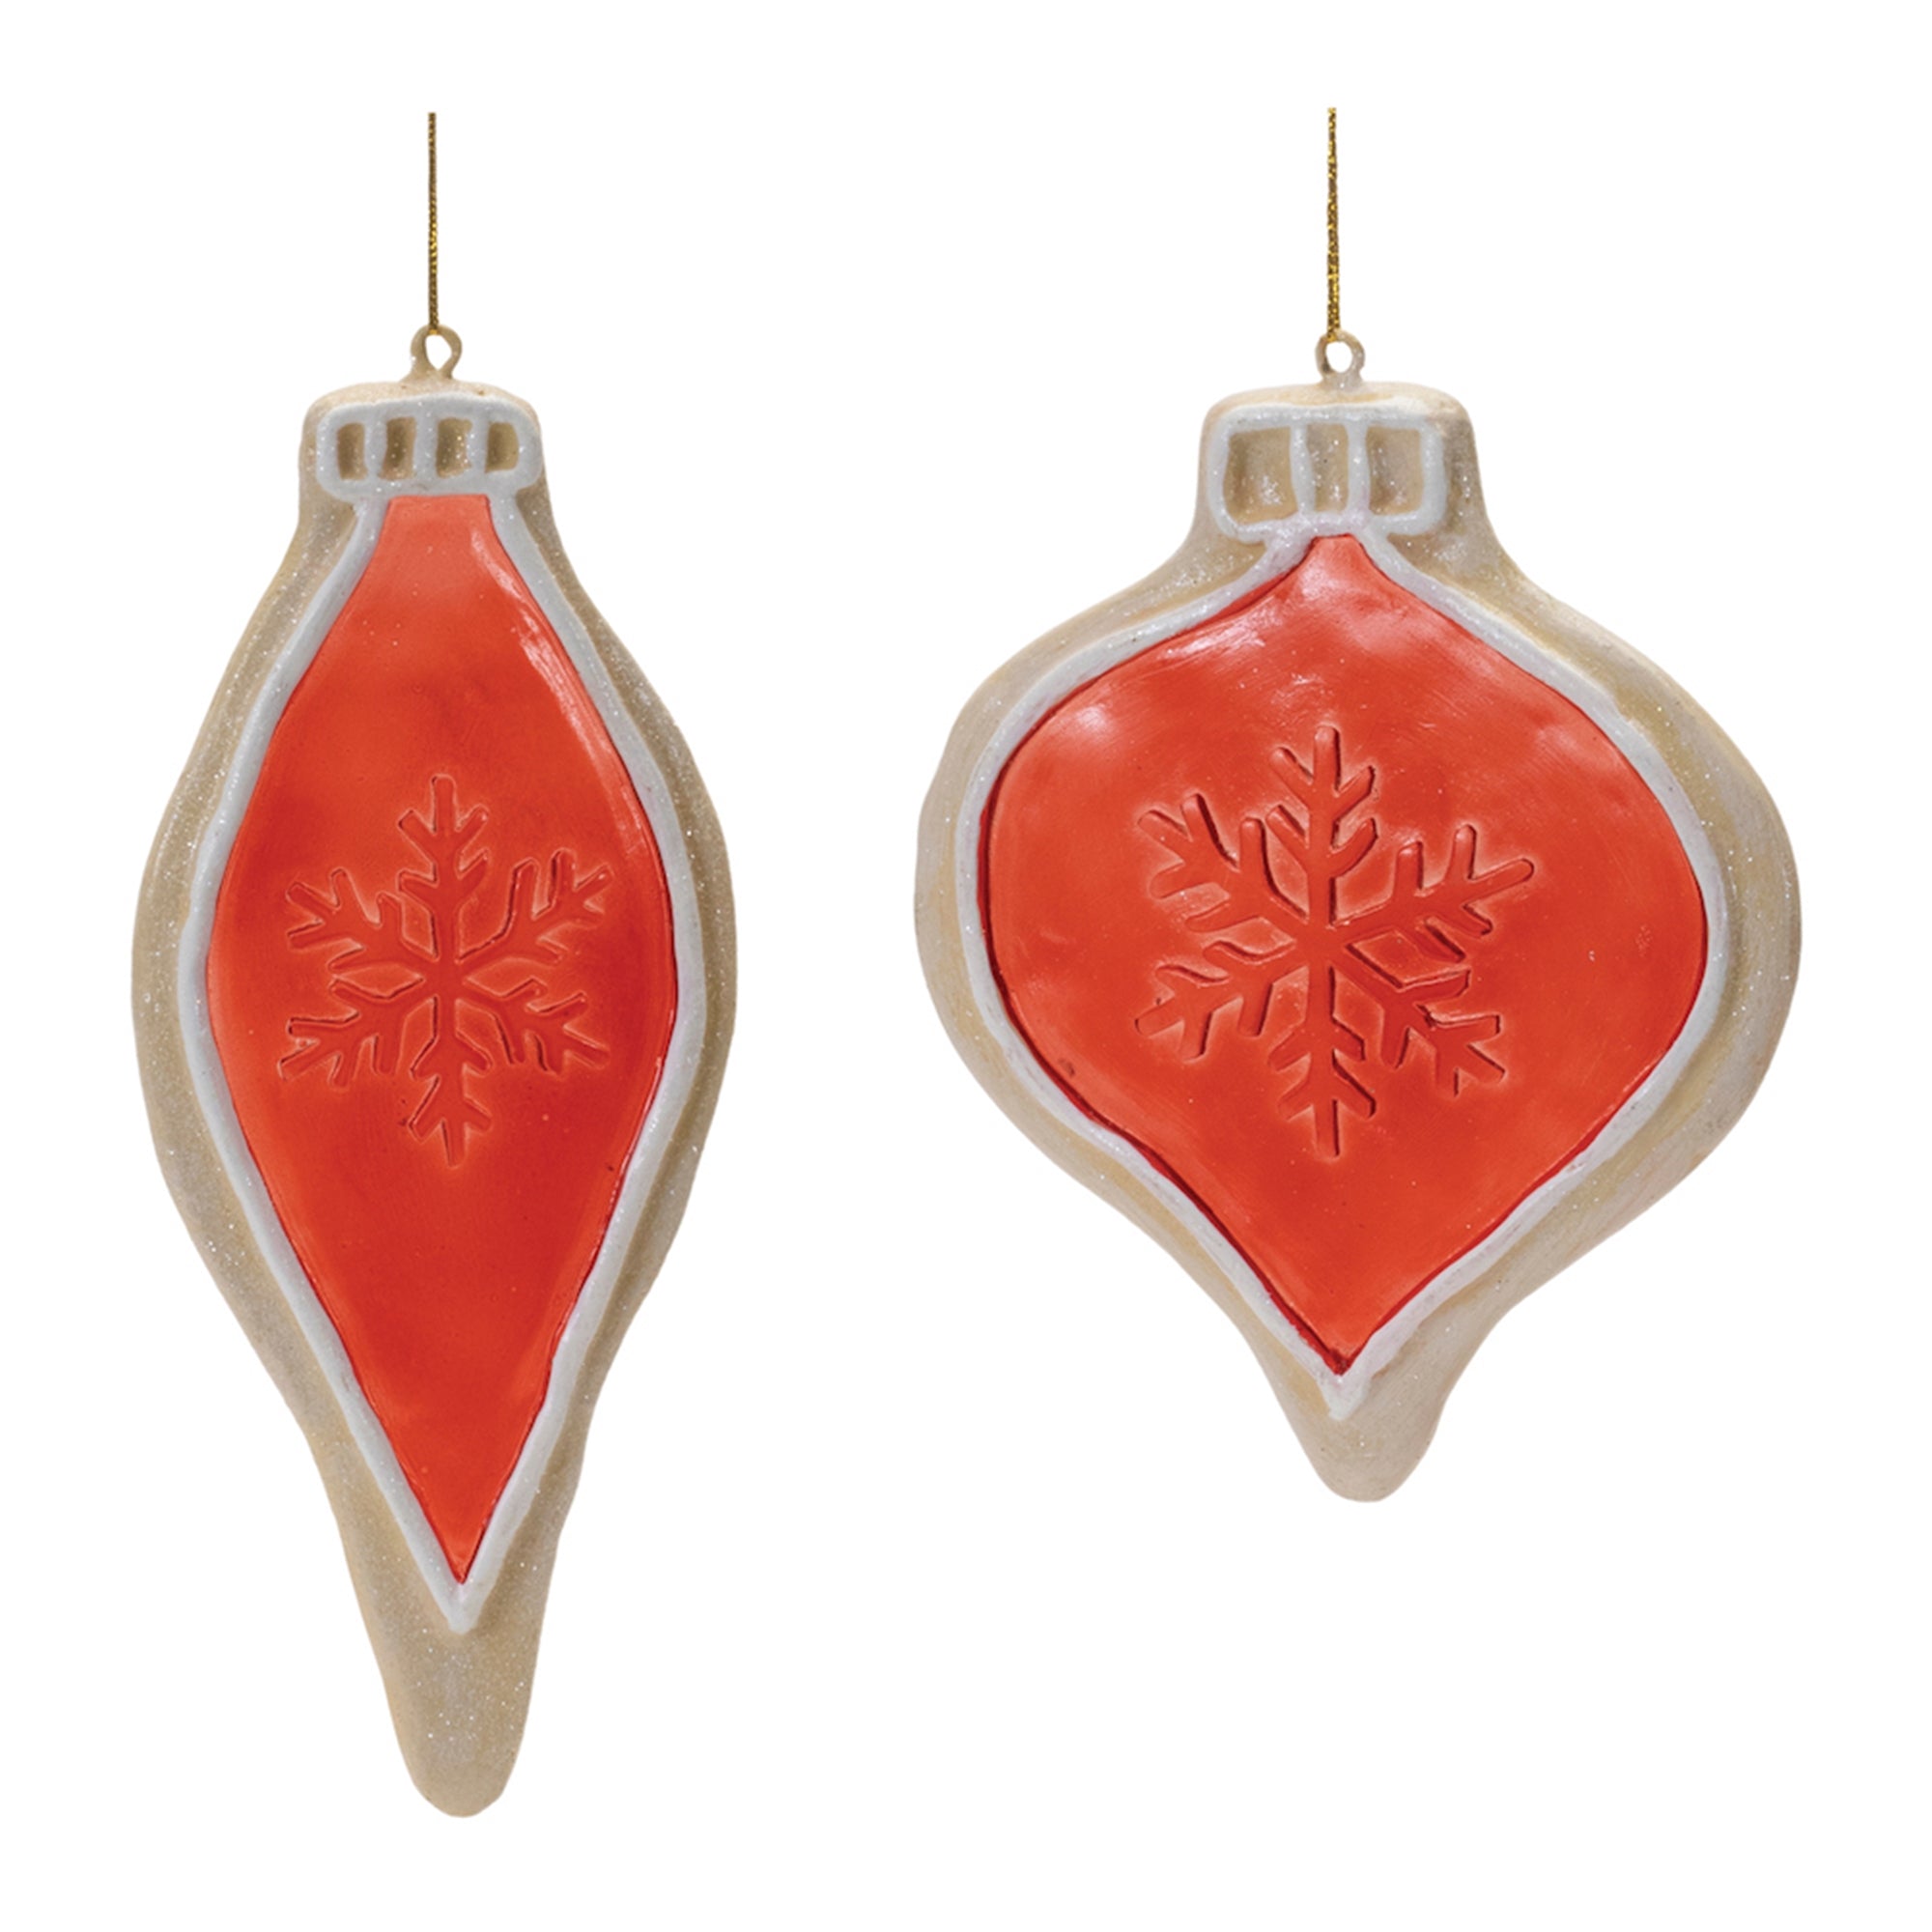 Frosted Cookie Onion Ornament (Set of 6)